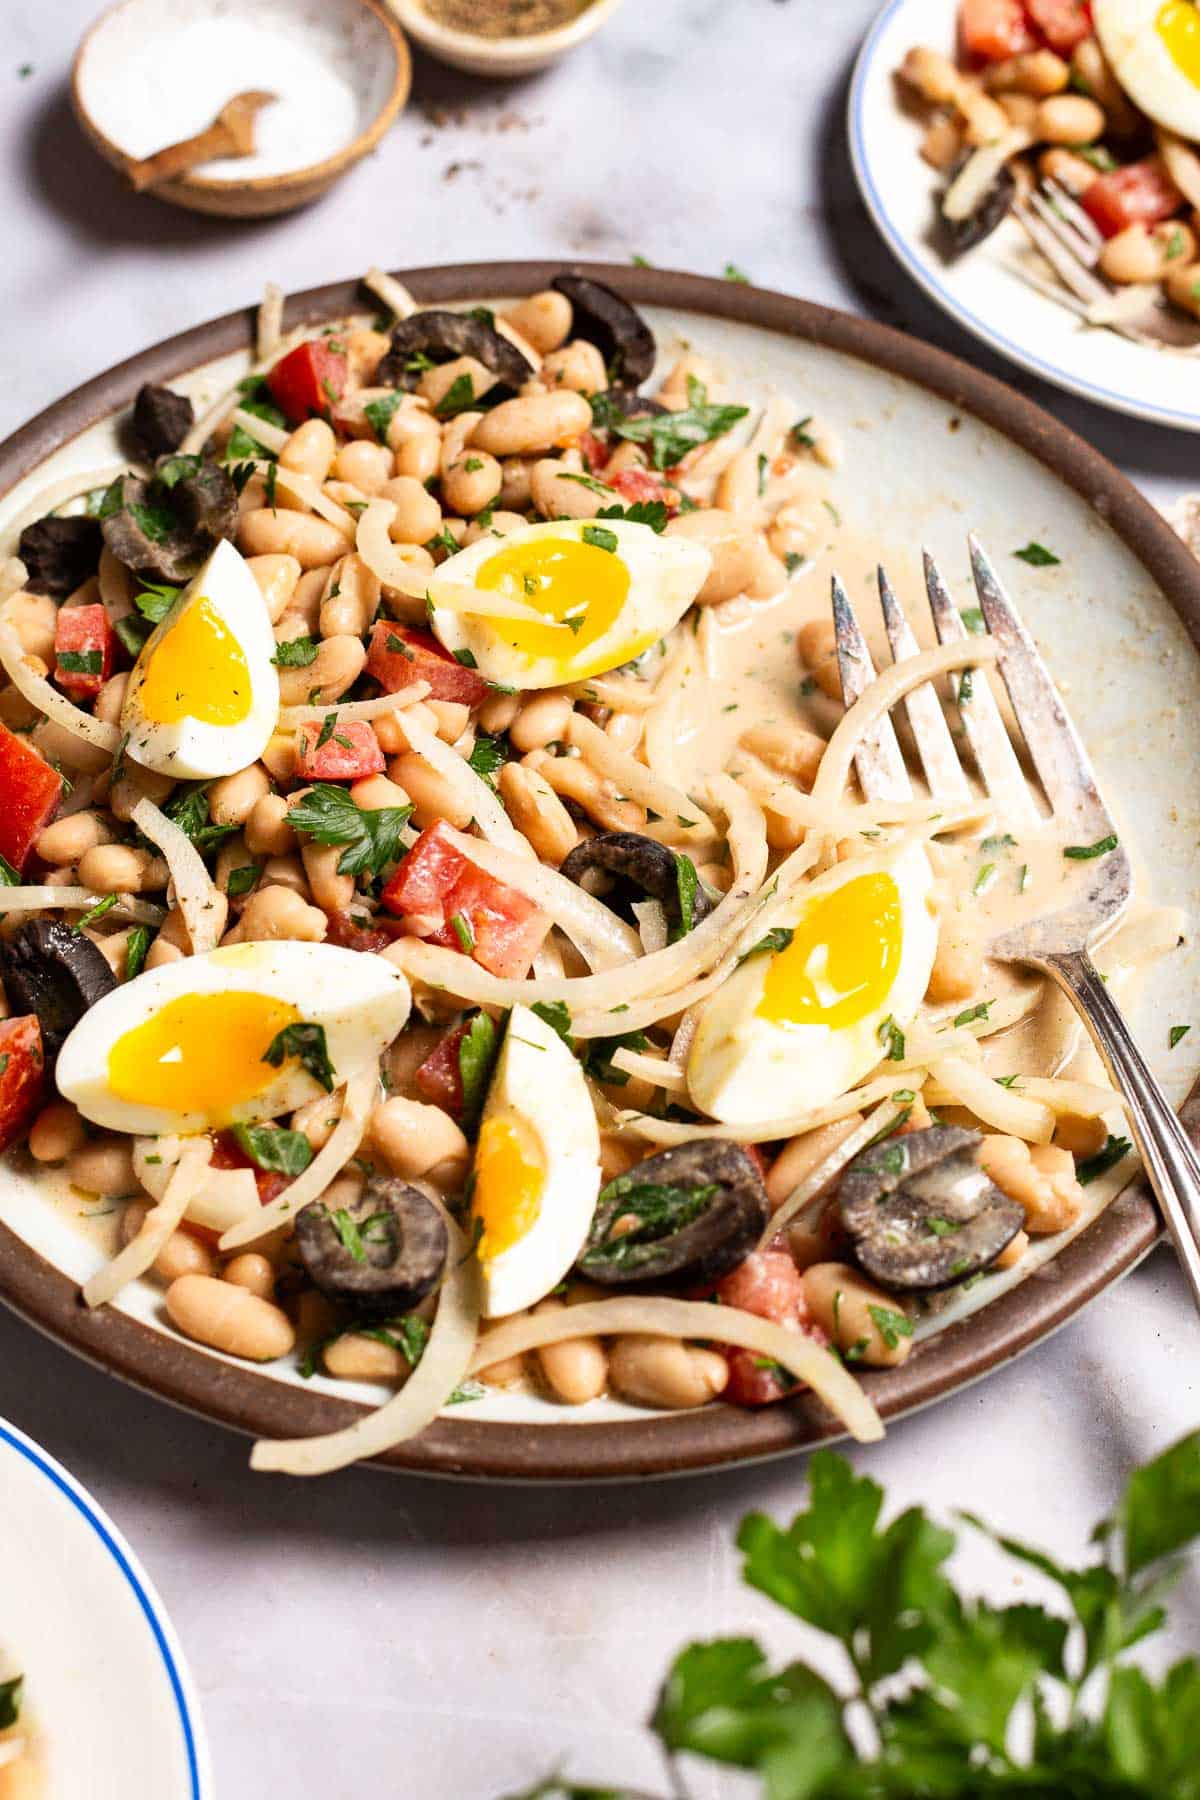 The cannellini bean salad on a serving platter with a fork. Next to this is a plate with a serving of the salad, some parsley, and small bowls of salt and pepper.